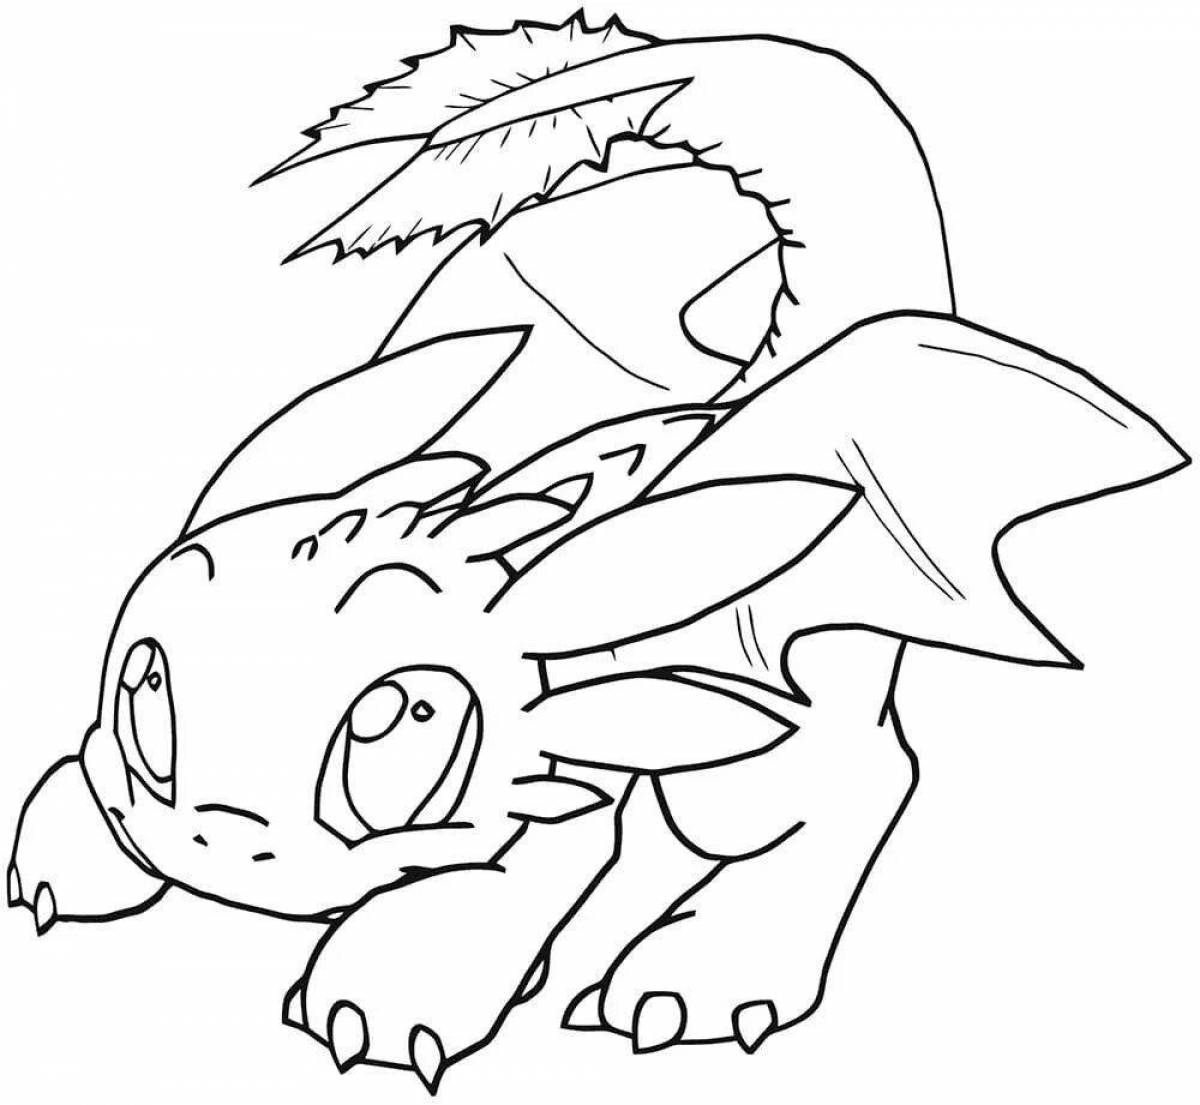 Toothless playful coloring for kids